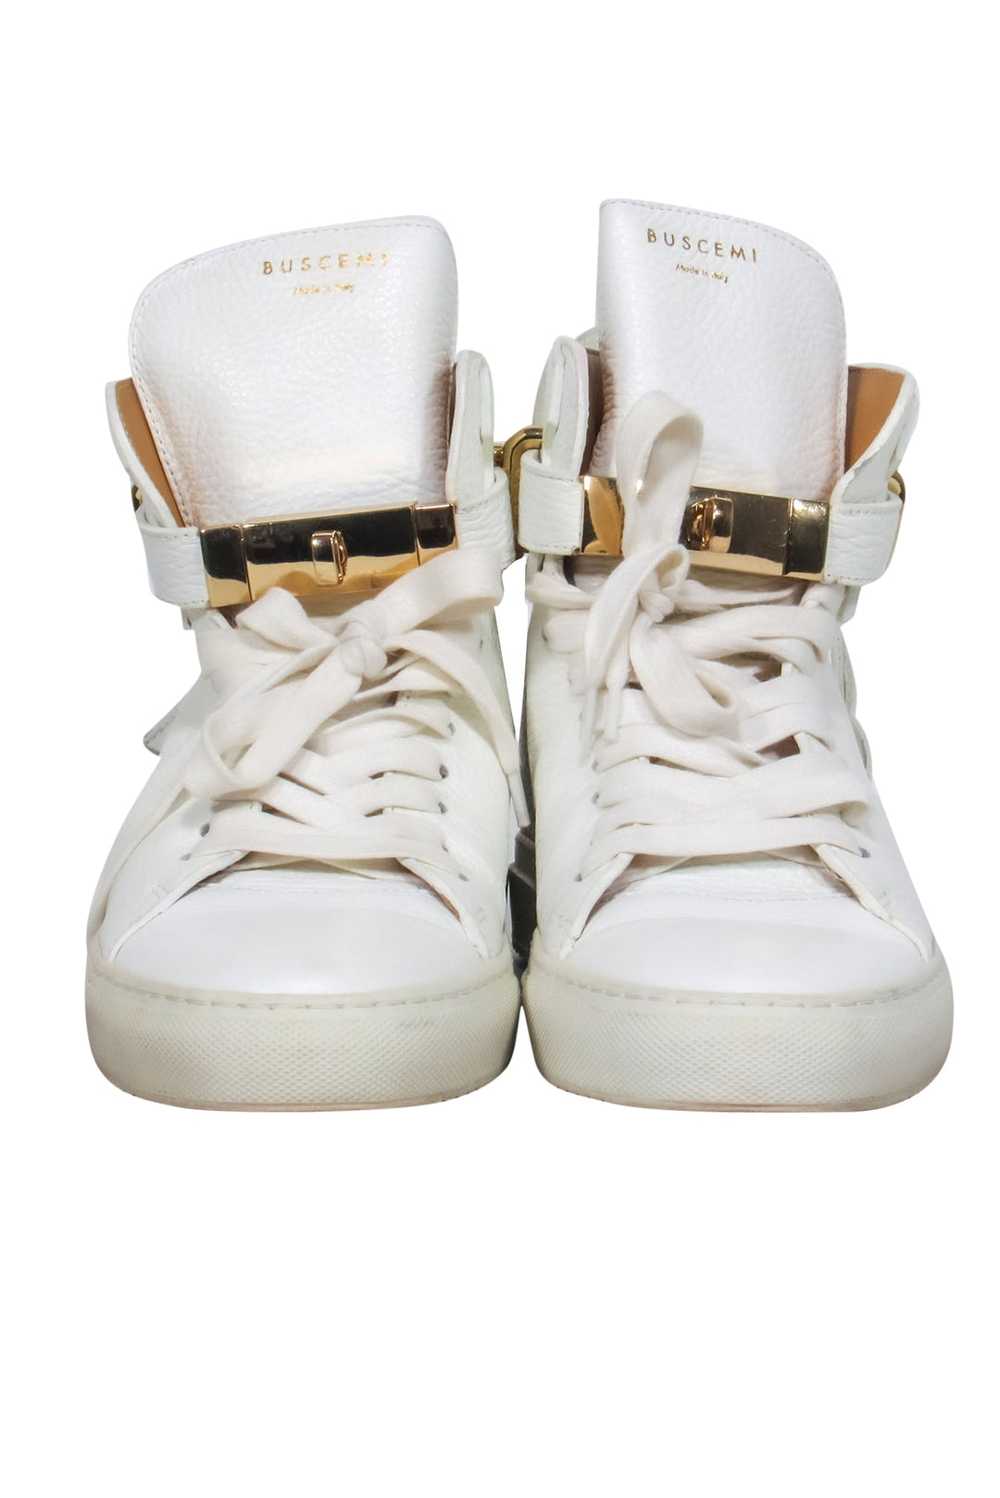 Buscemi - White 100MM Sneakers w/ Gold-Toned Hard… - image 2